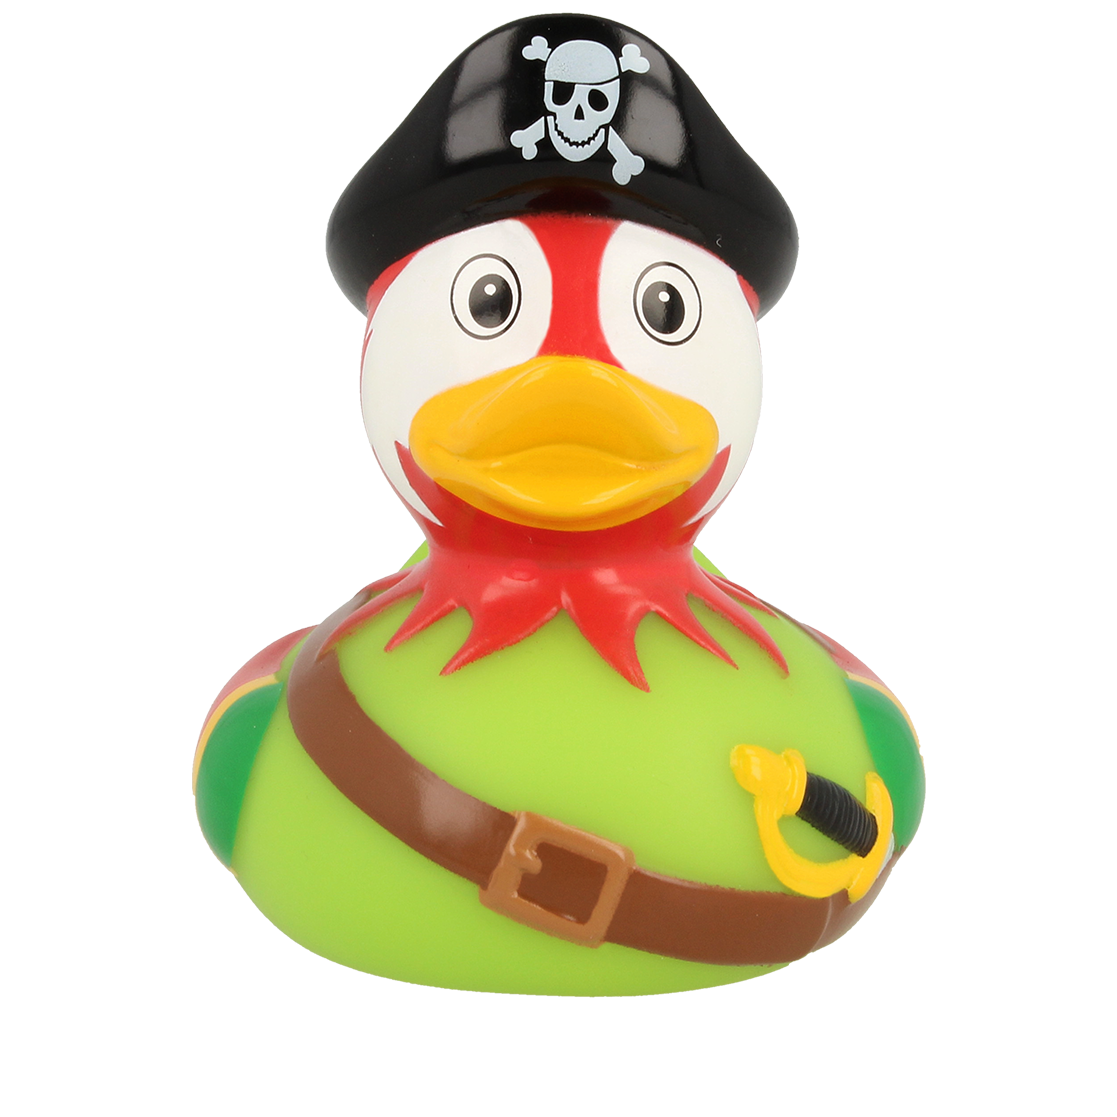 Duck pirate parrot